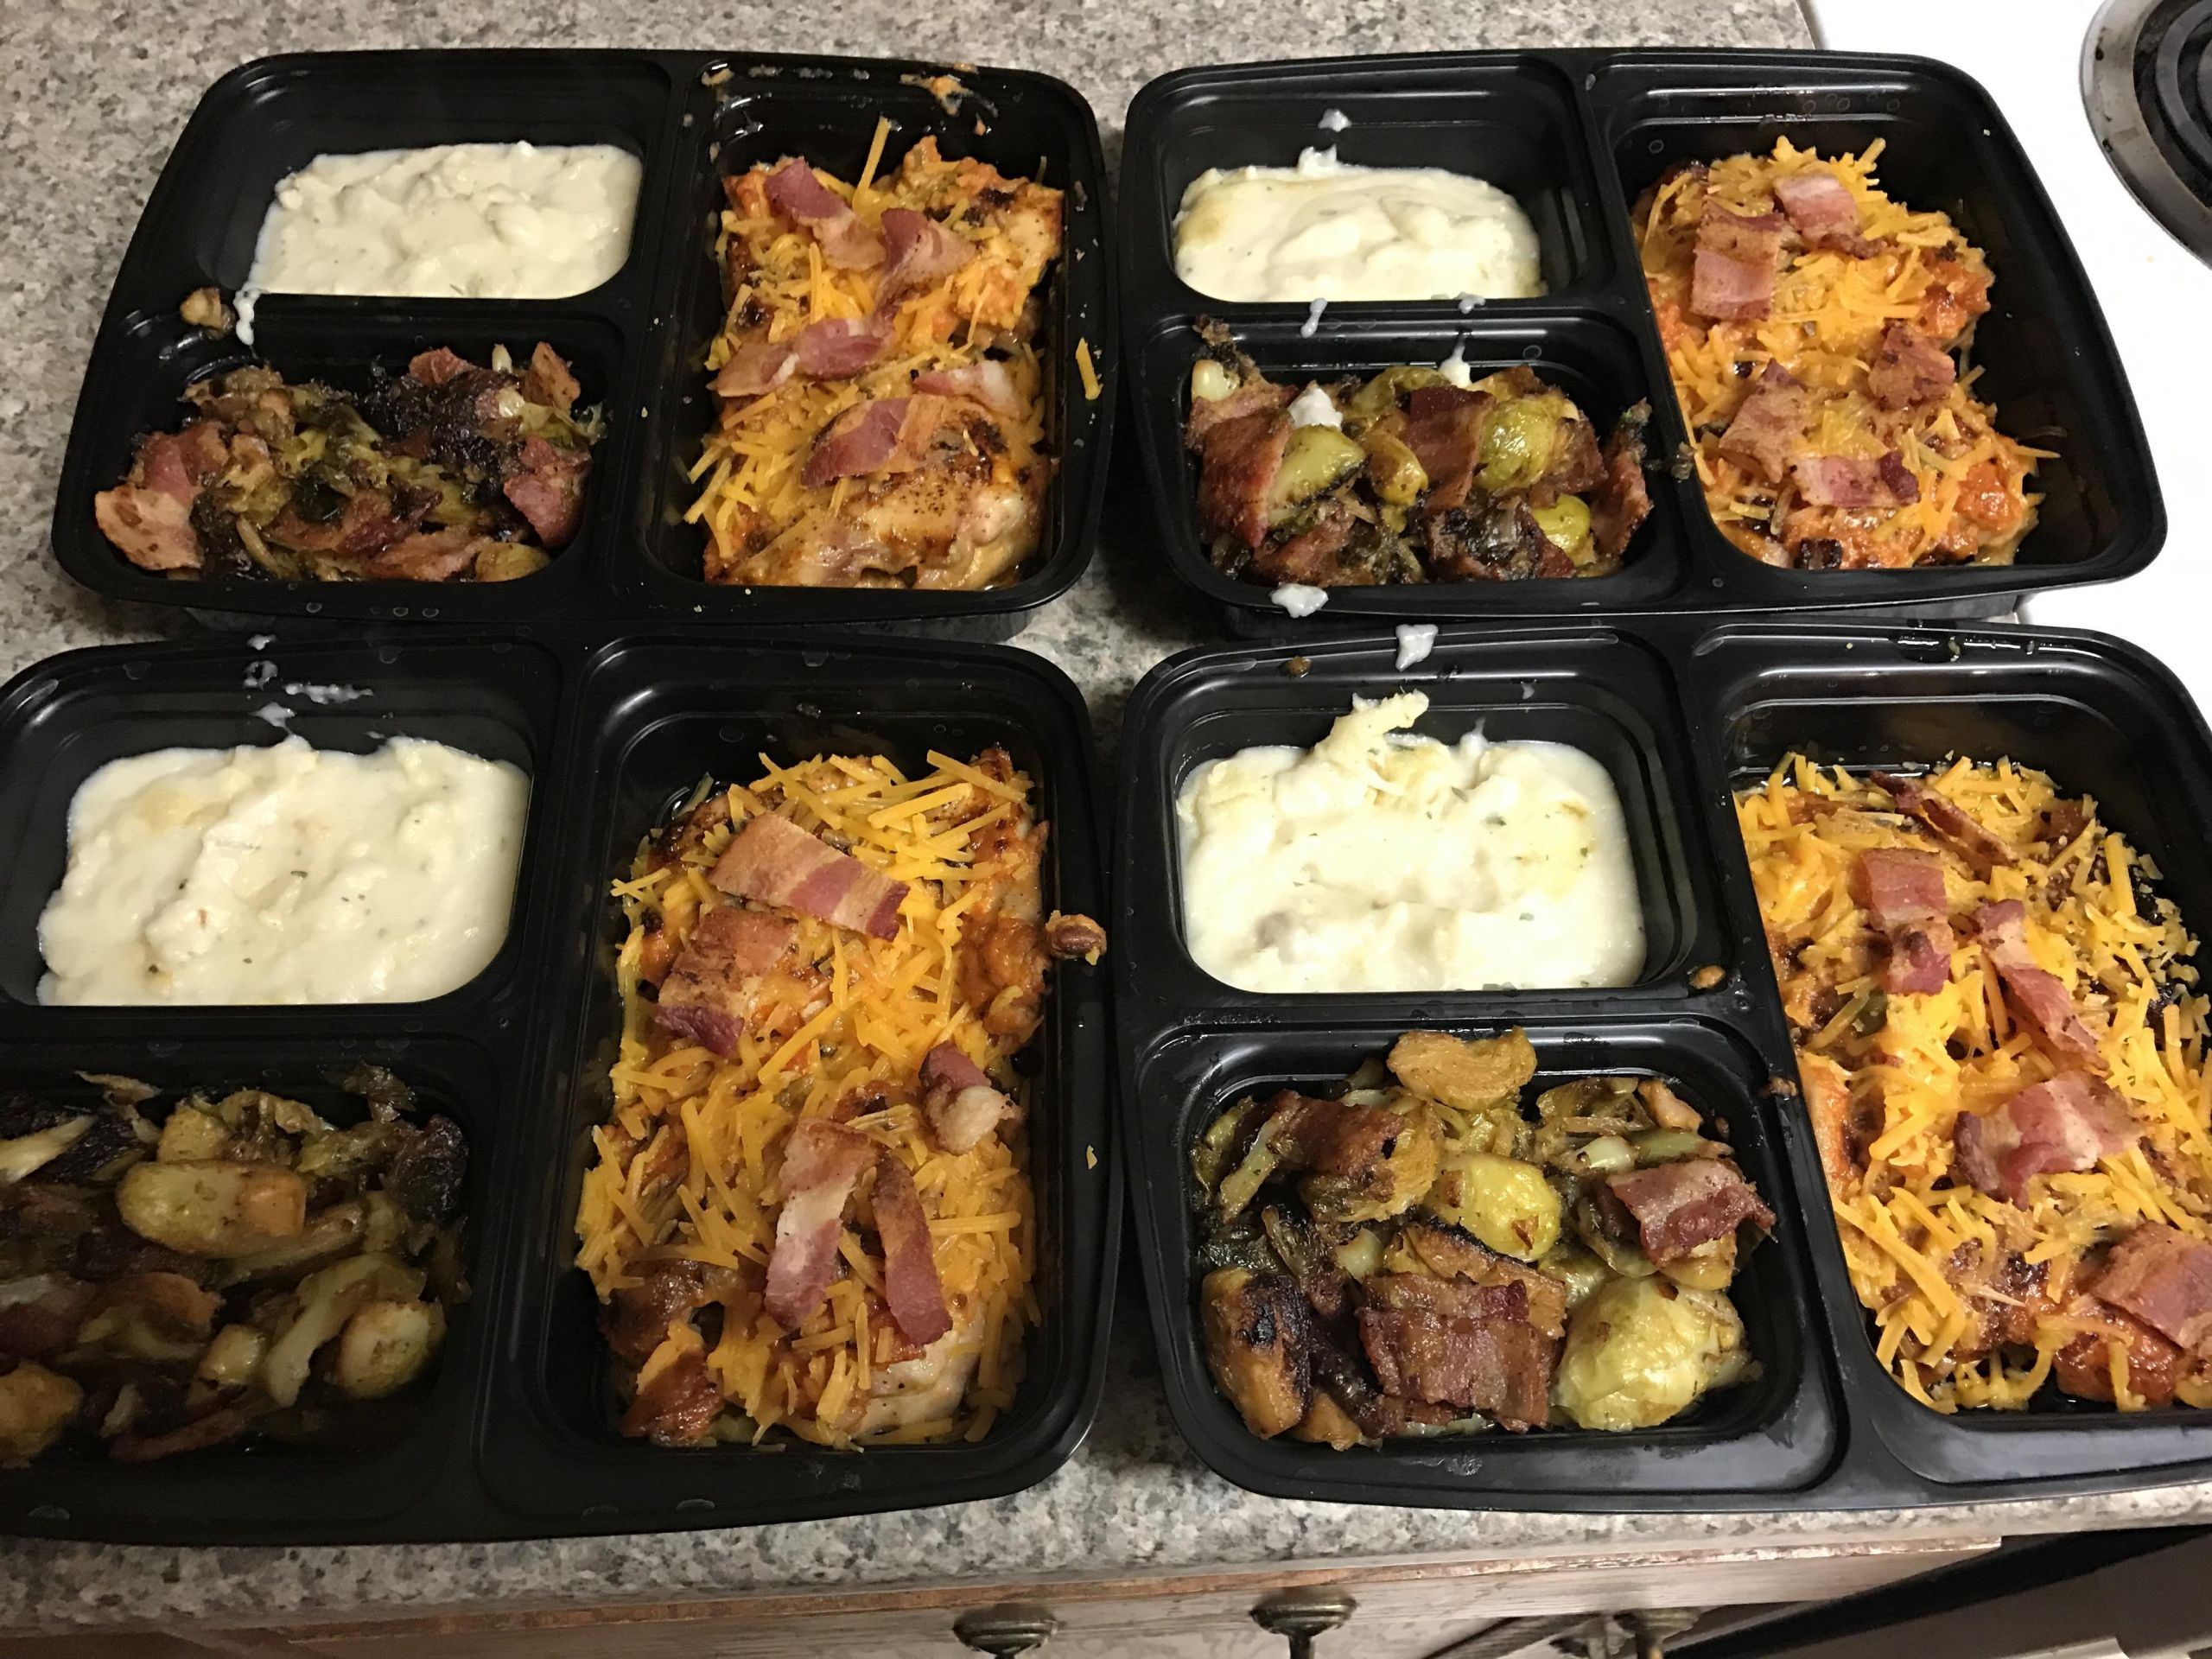 Keto Dinner Meal Prep For The Week
 Keto Meal Prep Southwest Chicken Brussel sprouts with